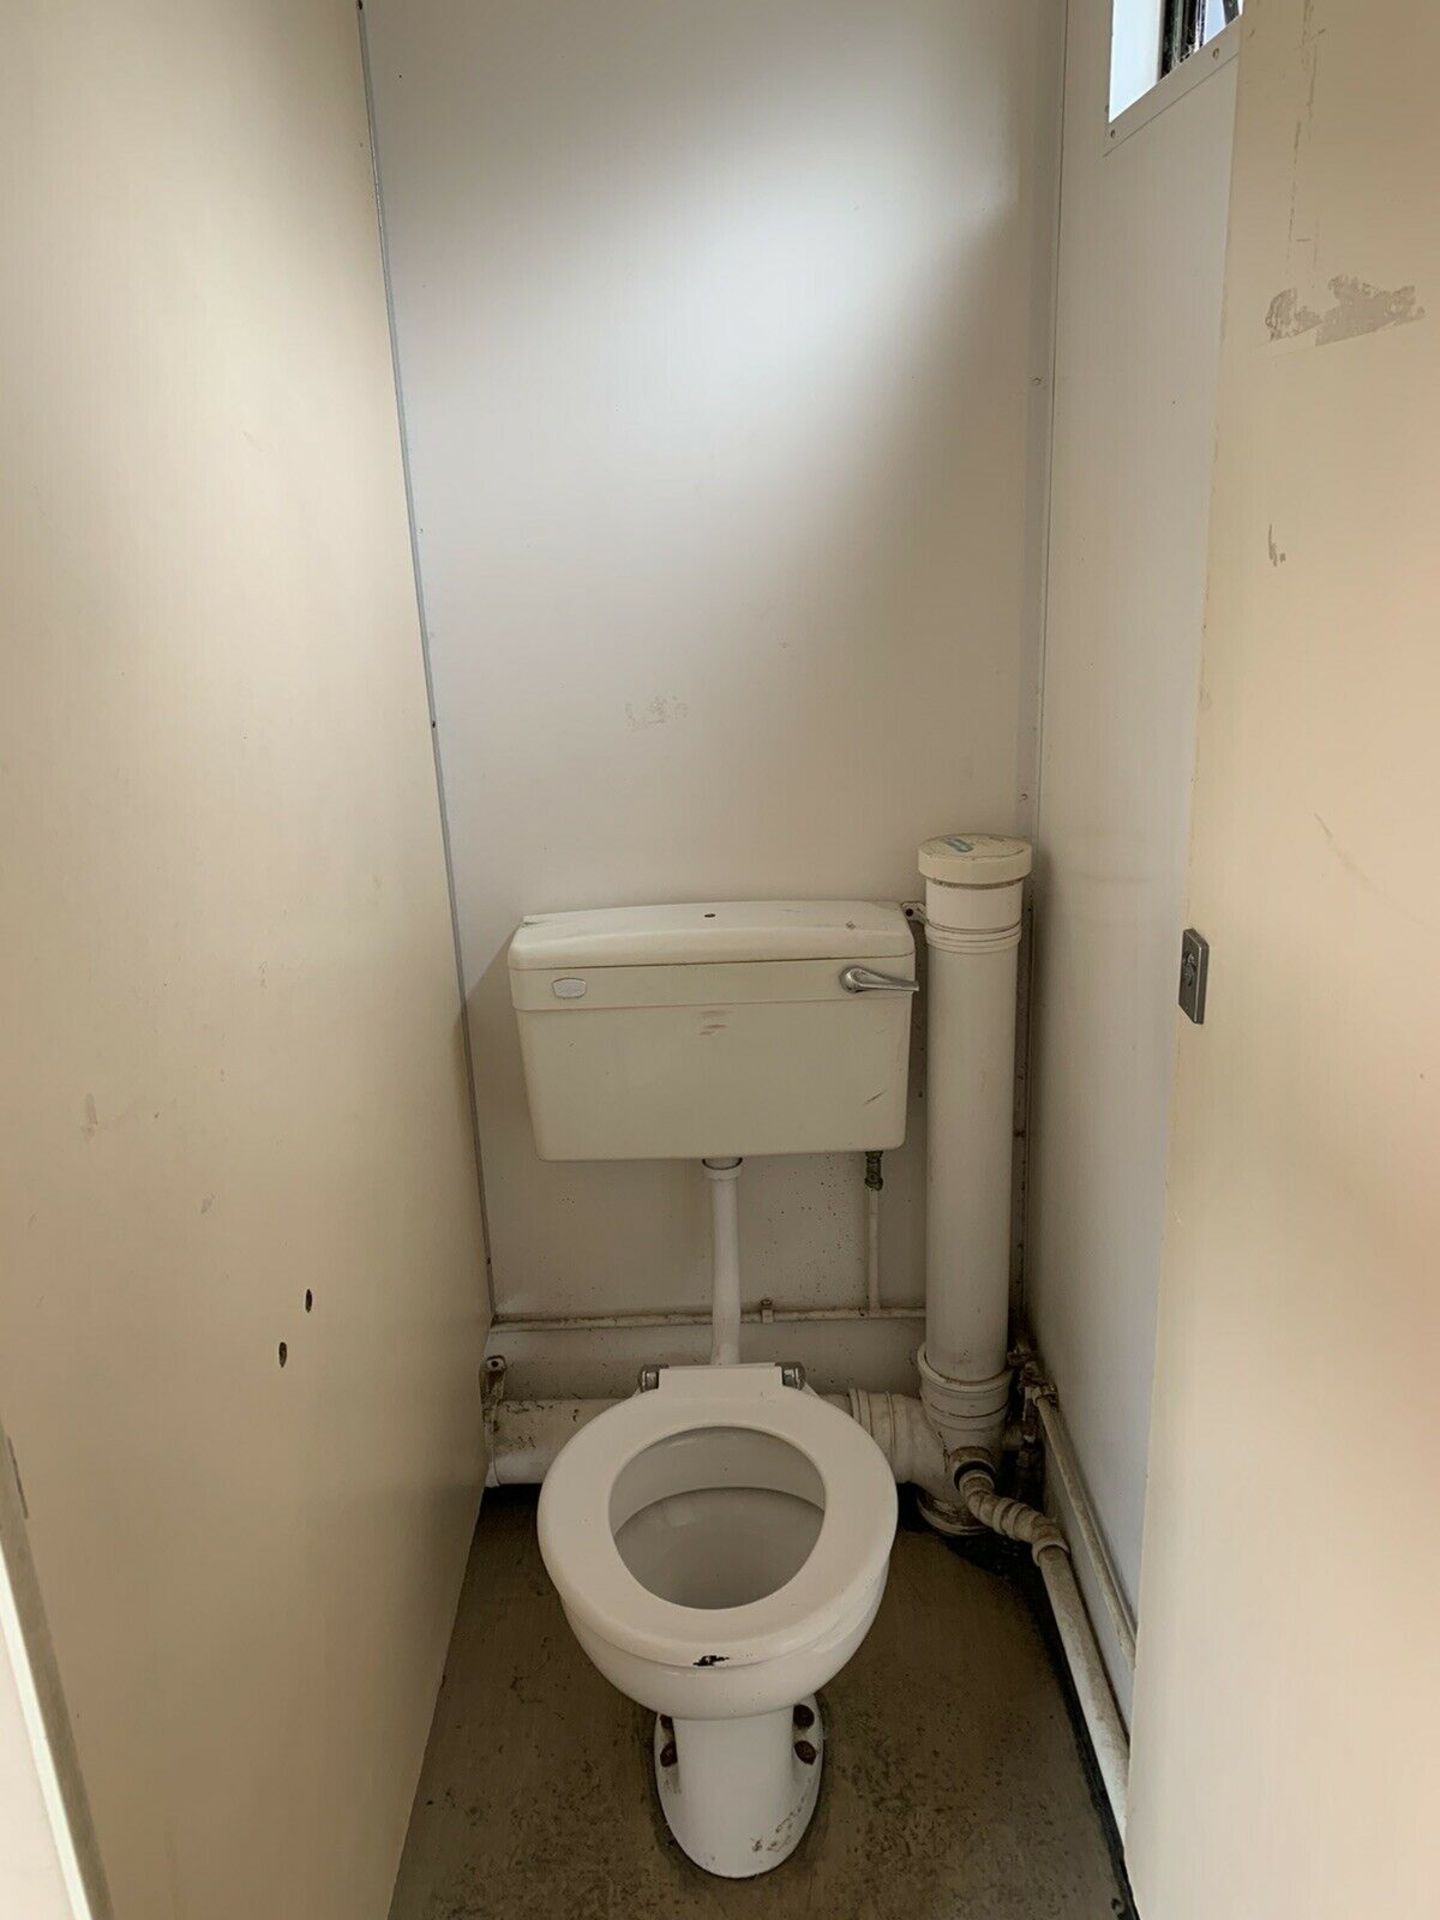 Portable Toilet Block 12ft x 8ft - Image 8 of 11